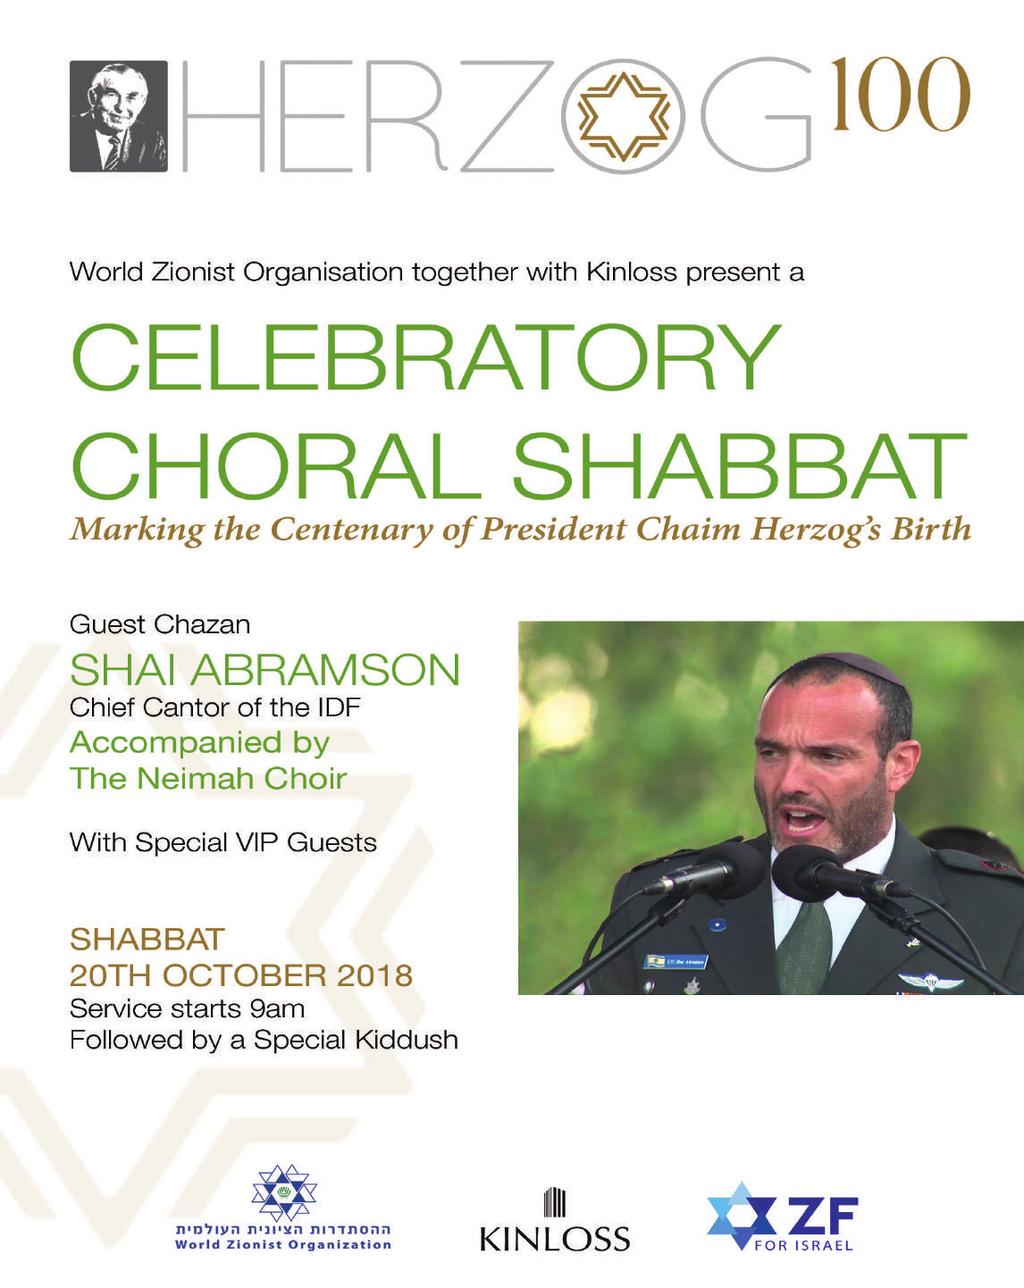 PLEASE NOTE THERE WILL BE A COMBINED SERVICE THIS SHABBAT